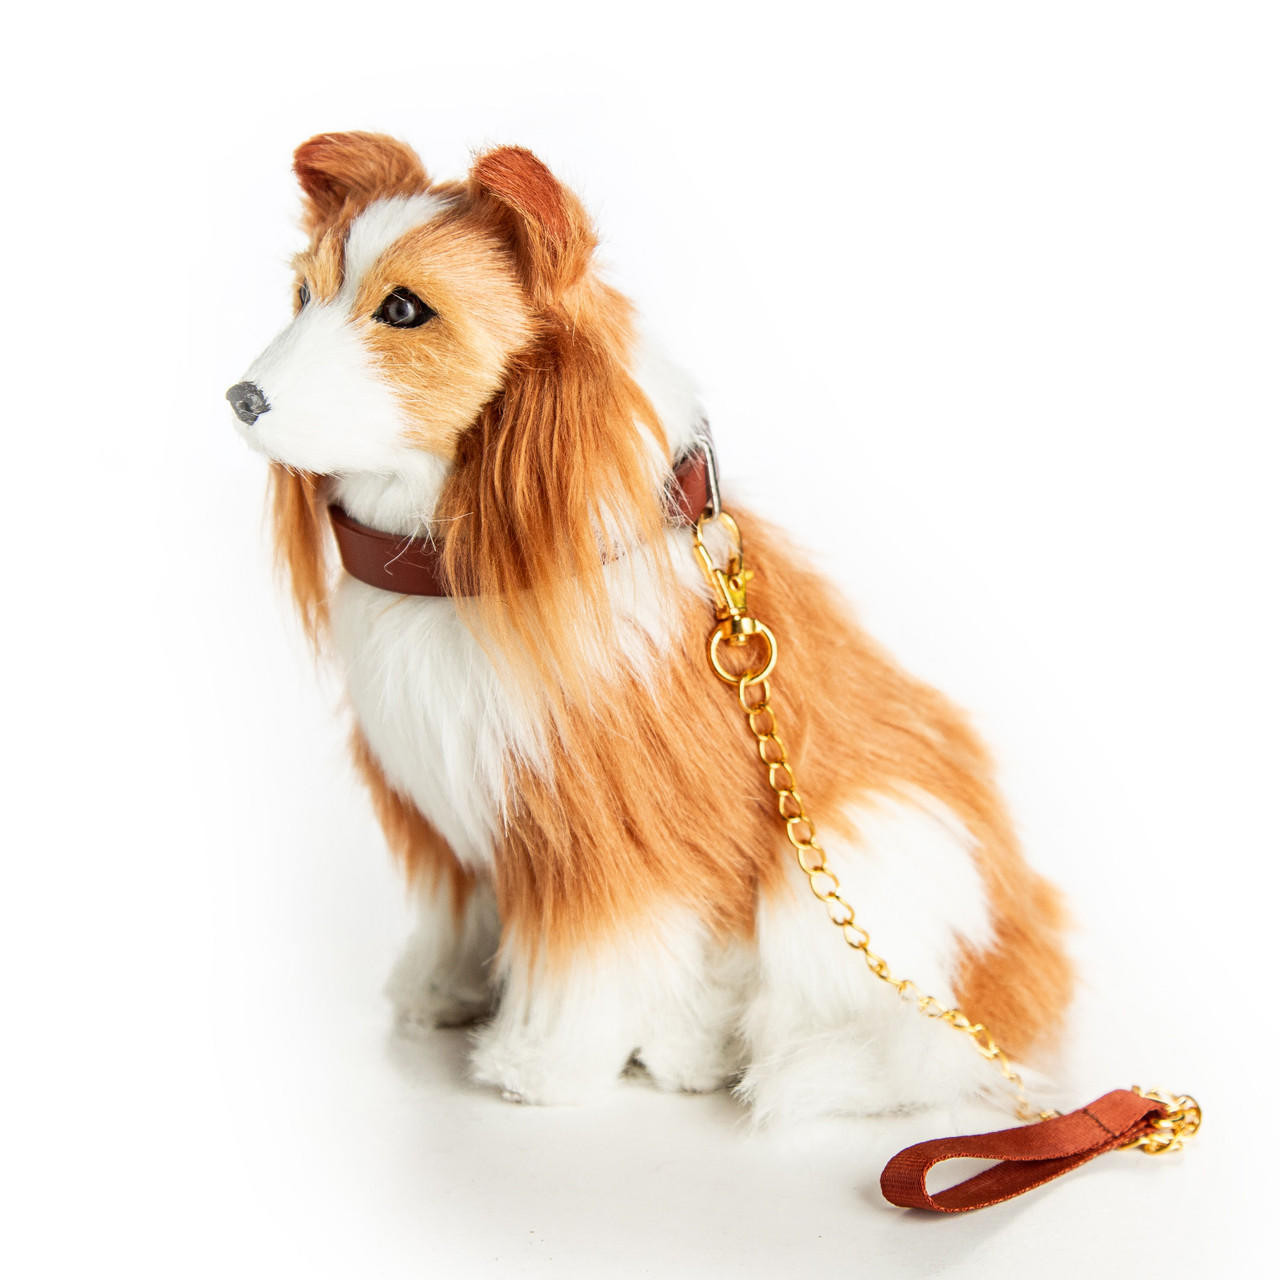 https://cdn11.bigcommerce.com/s-m5vcu70215/images/stencil/1280x1280/products/147/2256/the-queens-treasures-collie-puppy-dog-pet-accessory-for-18-inch-dolls__12130.1692298493.jpg?c=1